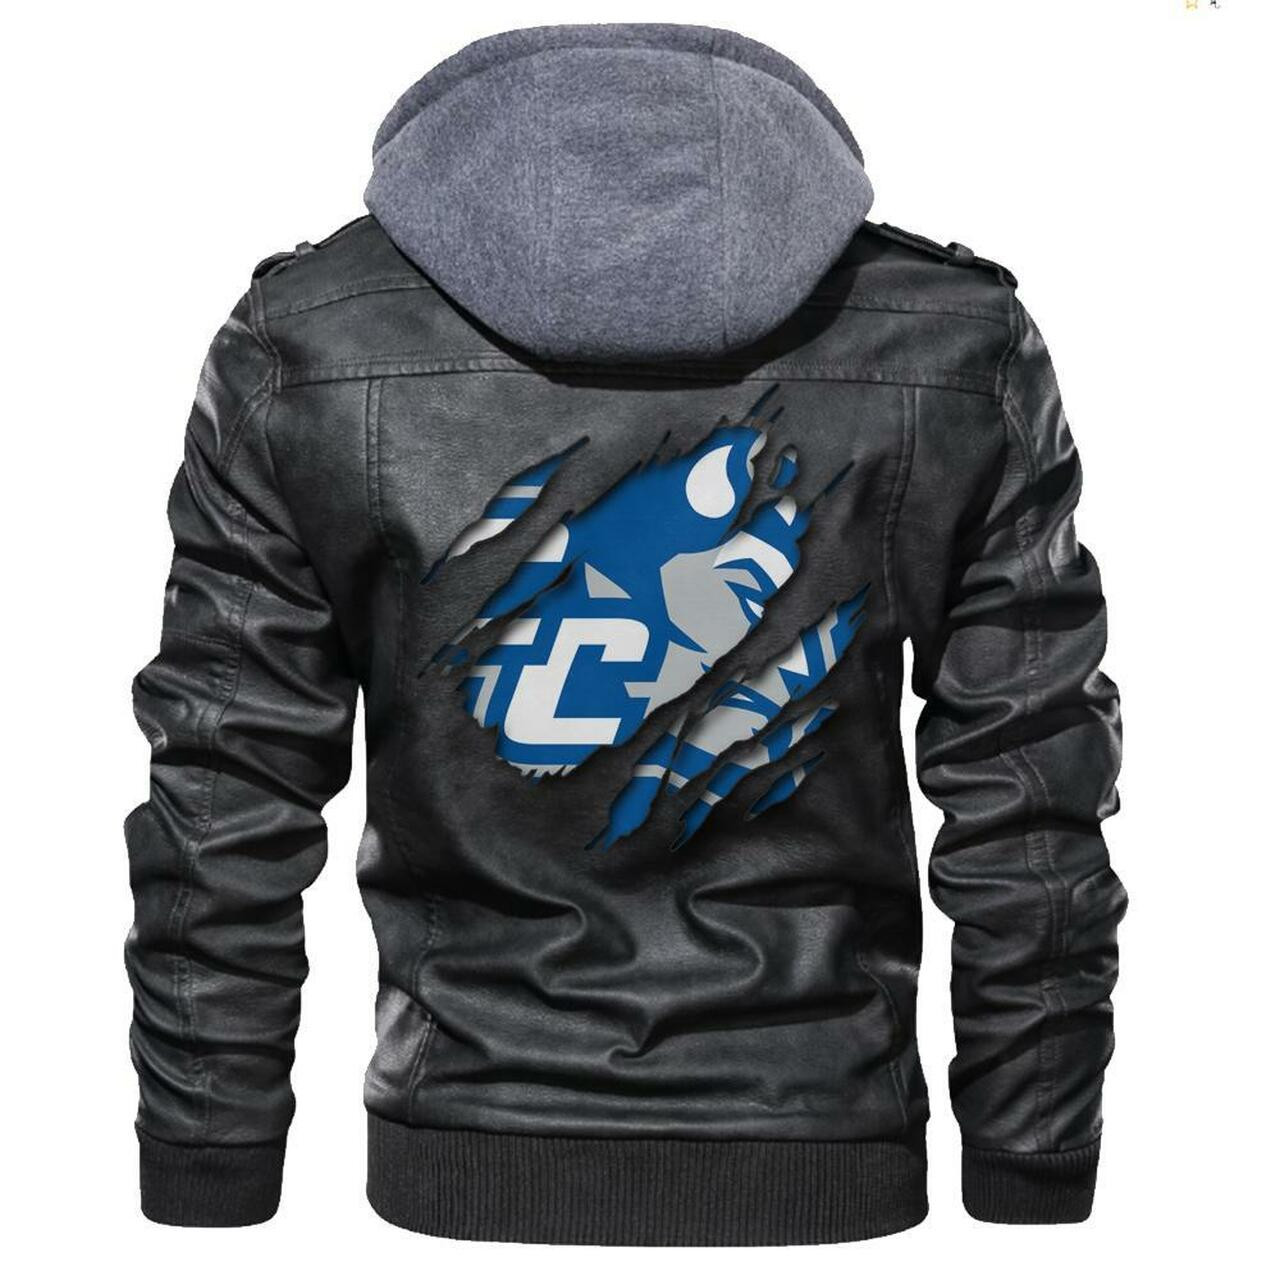 This leather Jacket will look great on you and make you stand out from the crowd 117